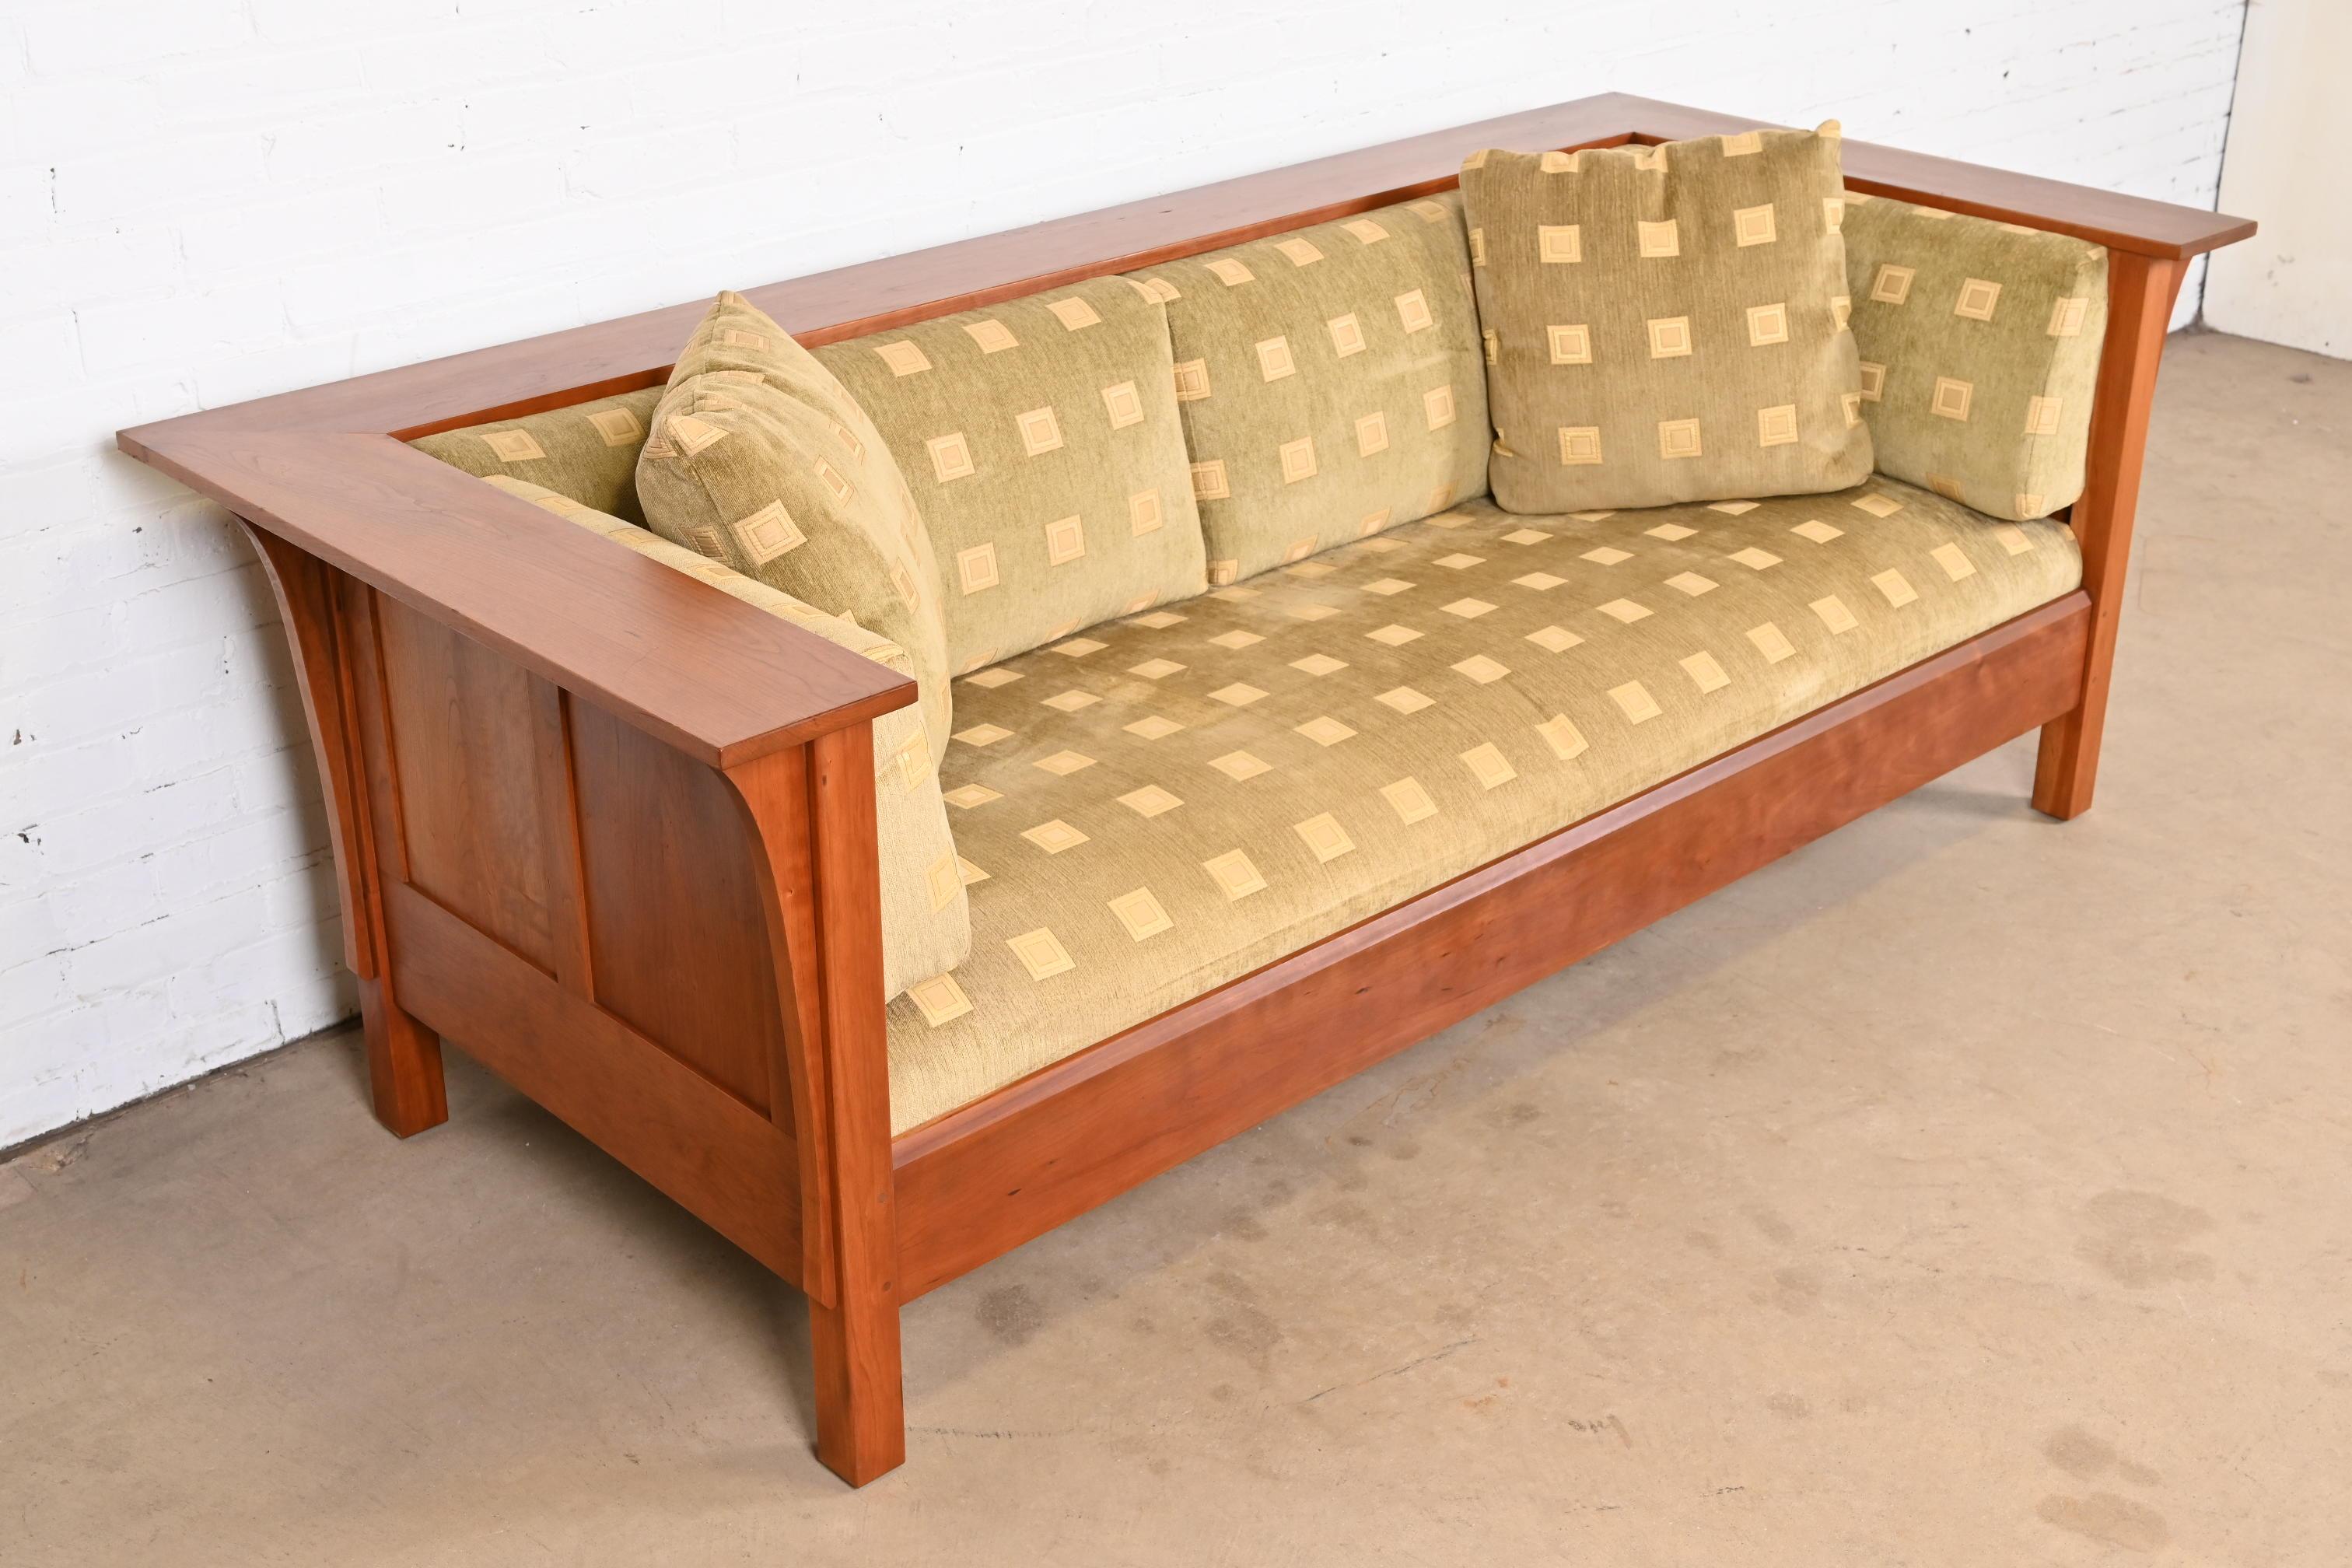 Stickley Mission Arts and Crafts Cherry Wood Settle Sofa In Good Condition For Sale In South Bend, IN